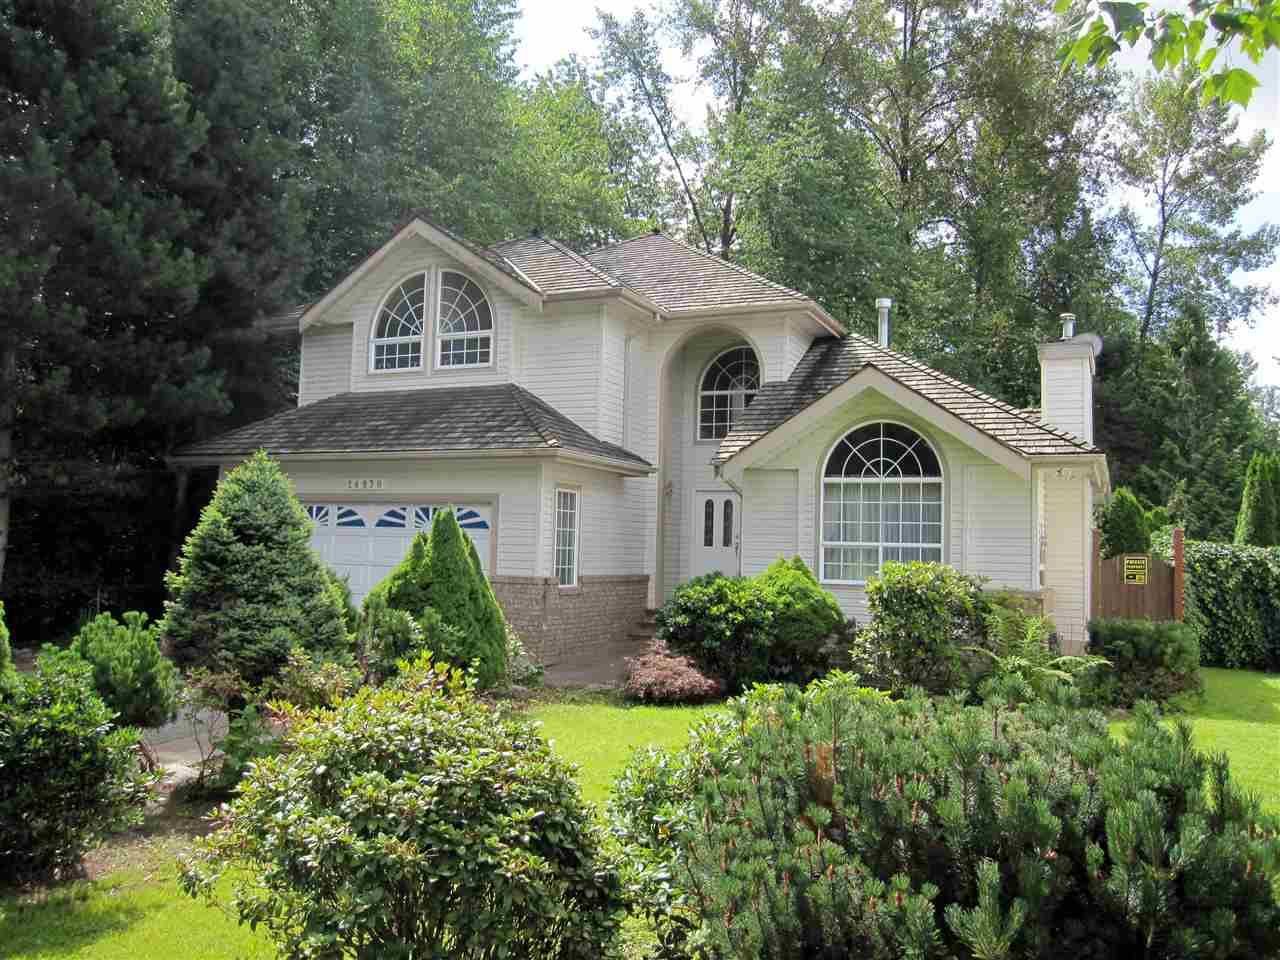 Main Photo: 24970 119 Avenue in Maple Ridge: Websters Corners House for sale : MLS®# R2117808